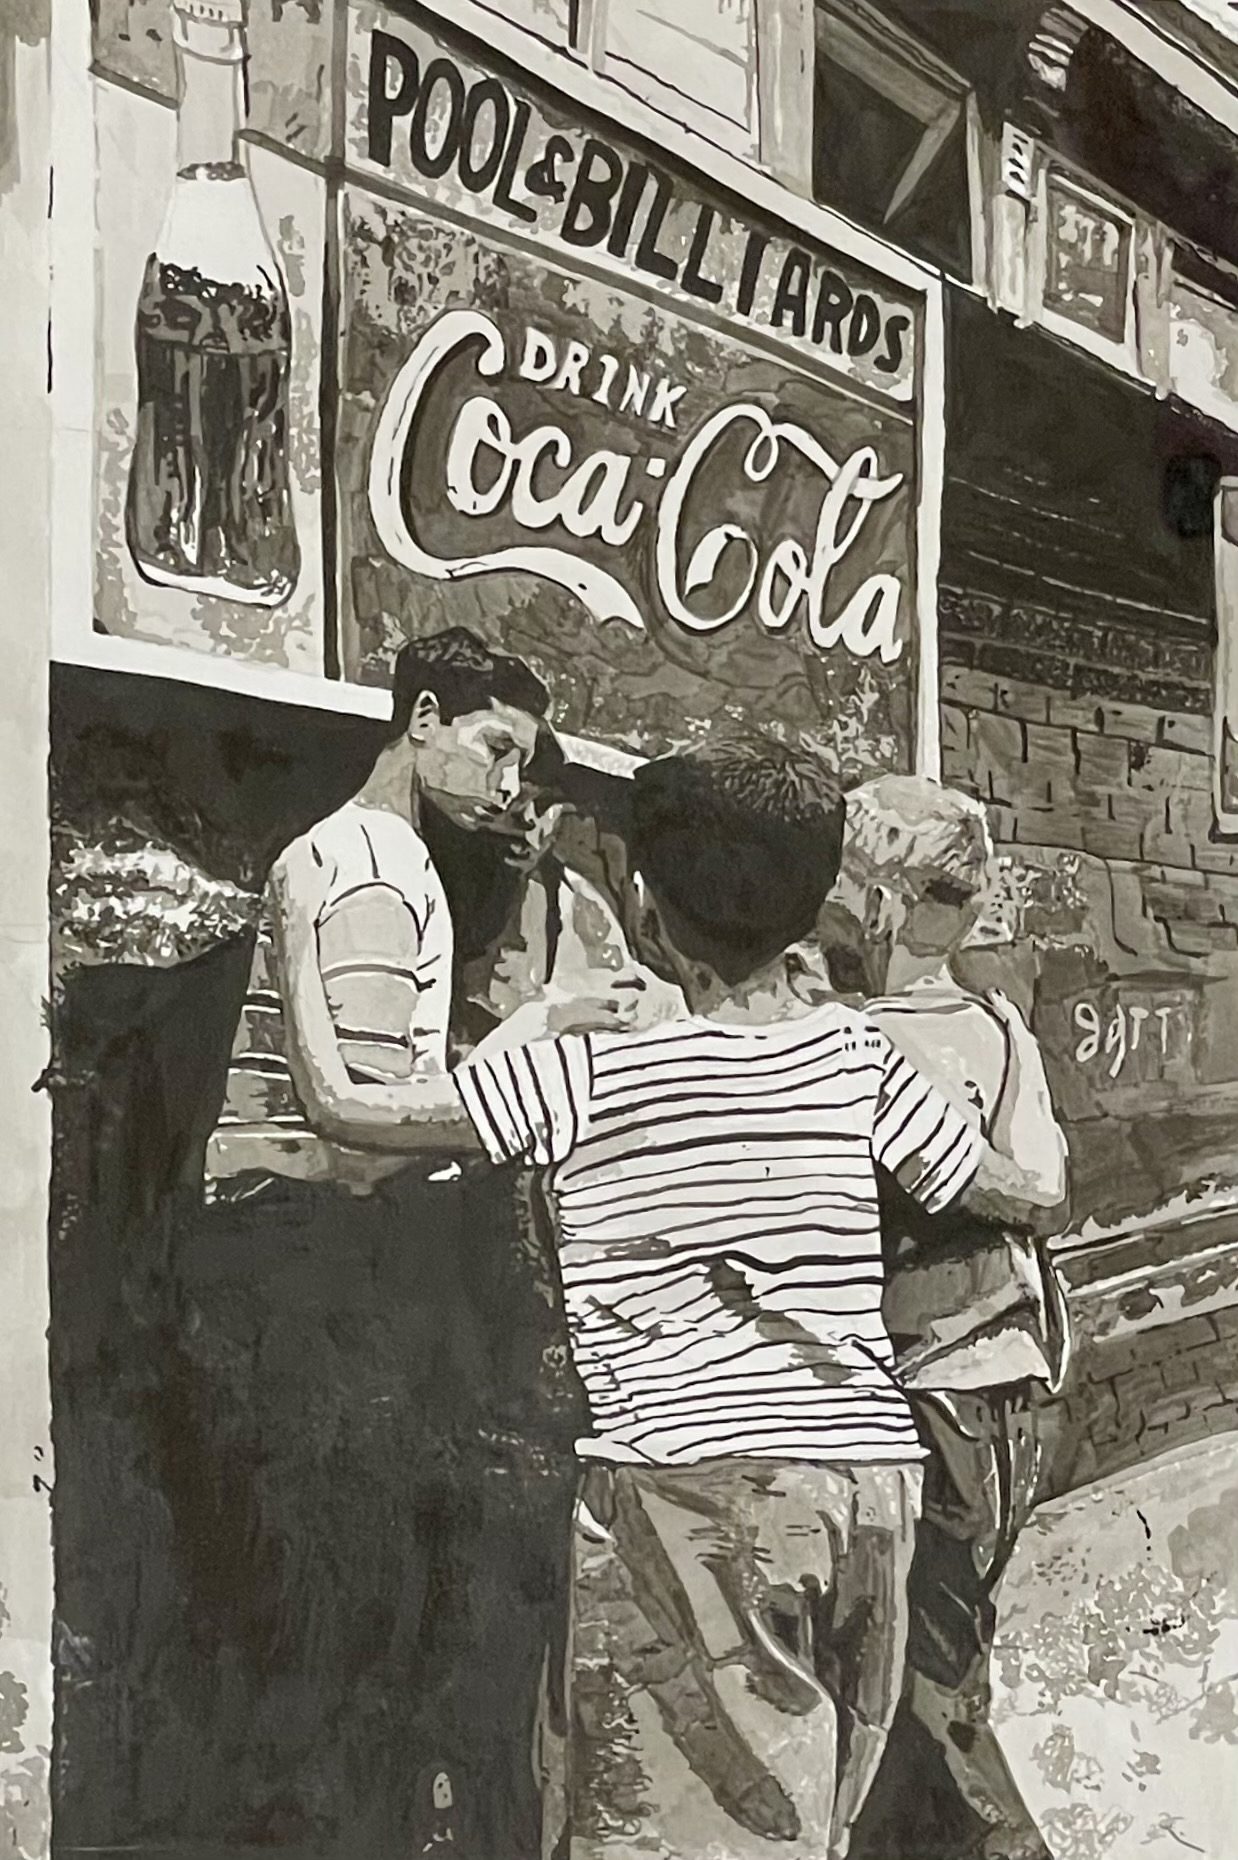 Best of Show Grace Kirby, Coca-Cola, pen and ink, 2021, 10th Grade, Hannibal High School